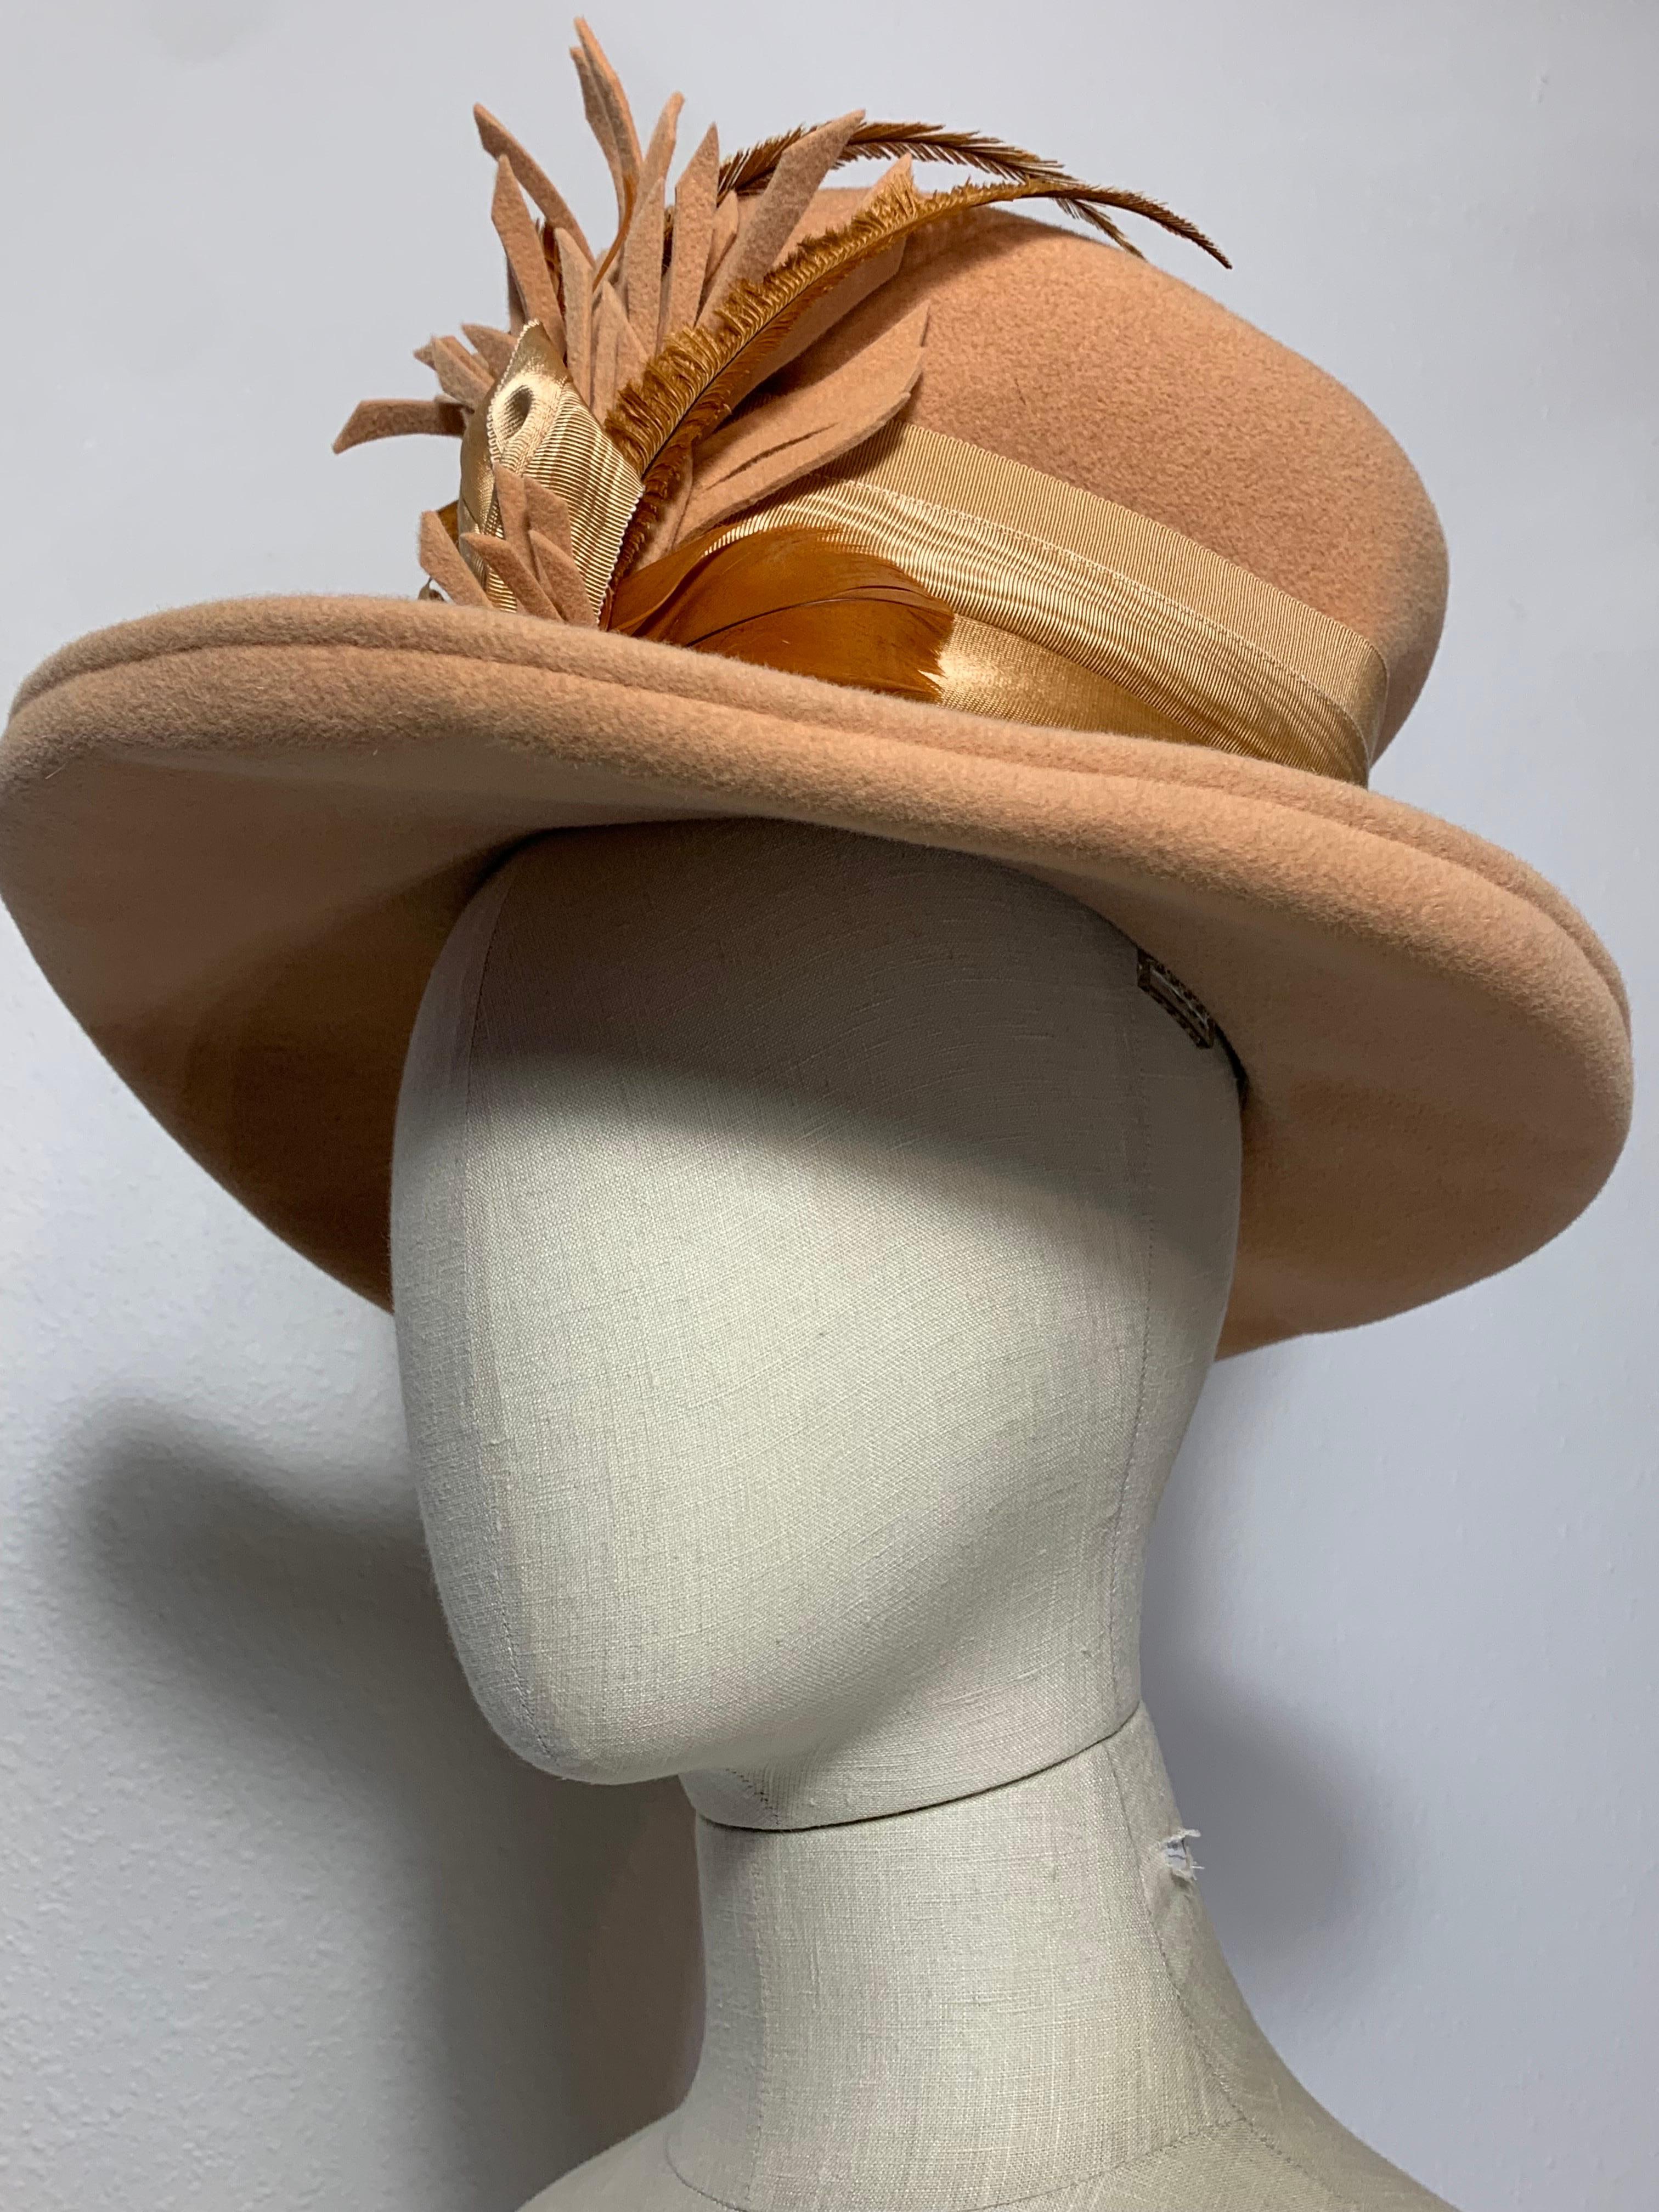 Maison Michel Apricot Felt High Top Hat w Large Feather Spray & Striped Band For Sale 5